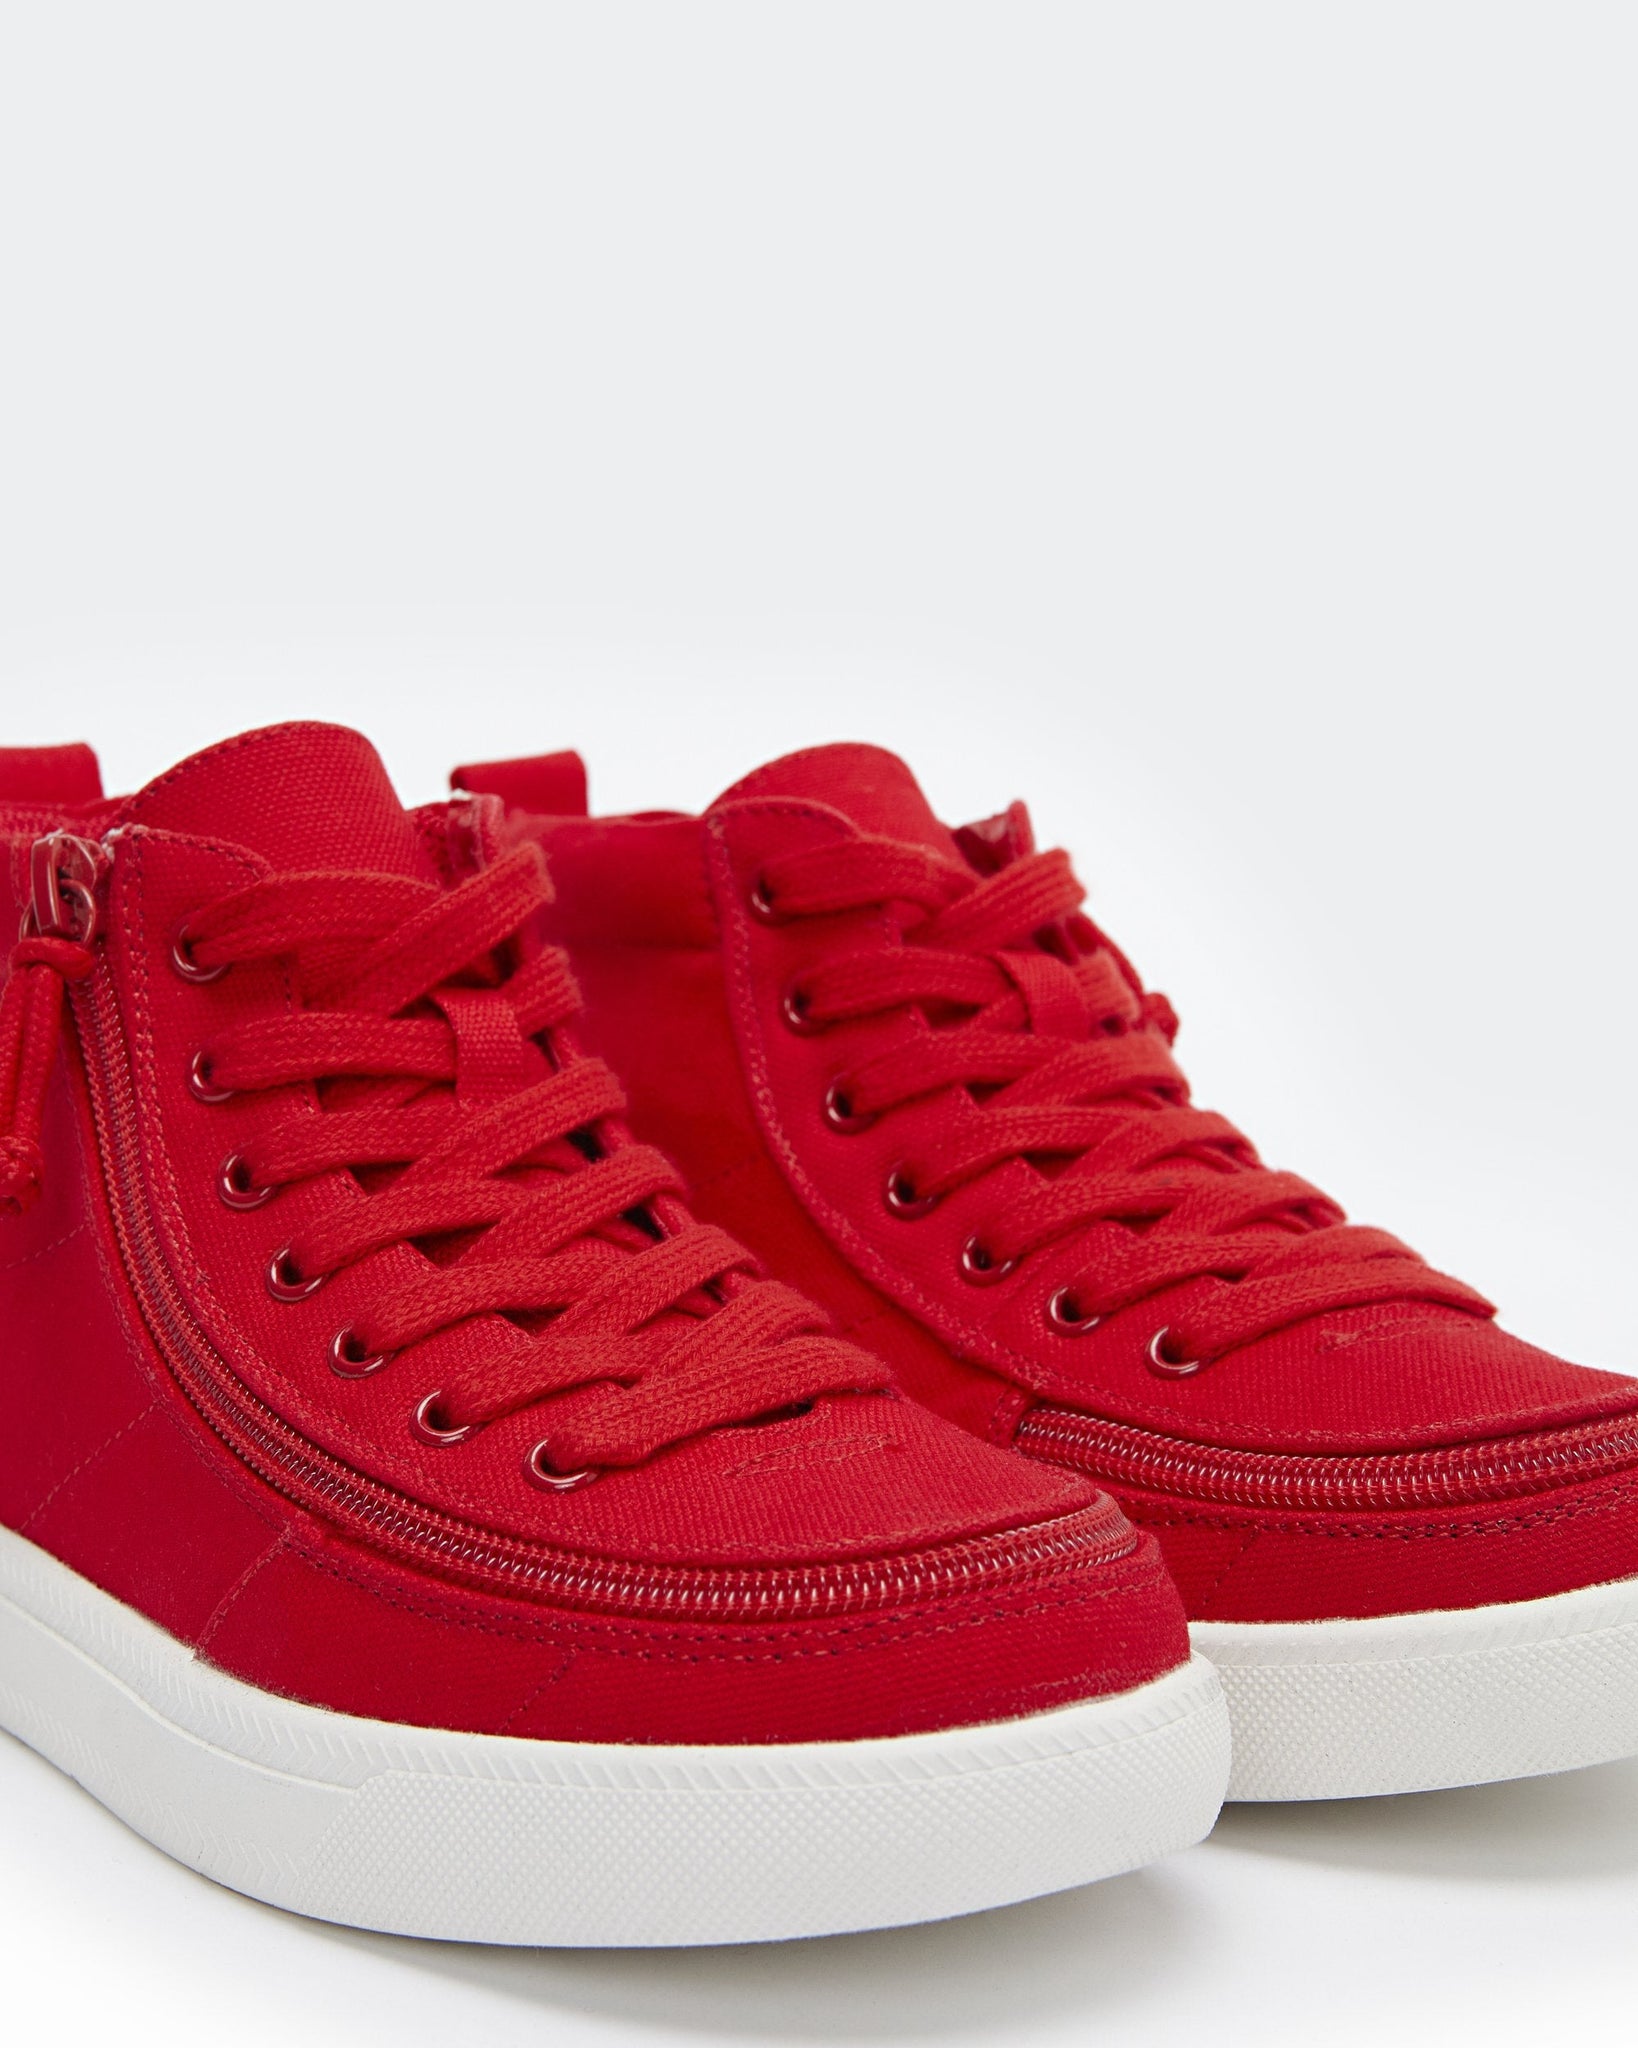 DR II High Top (Kids) - Red